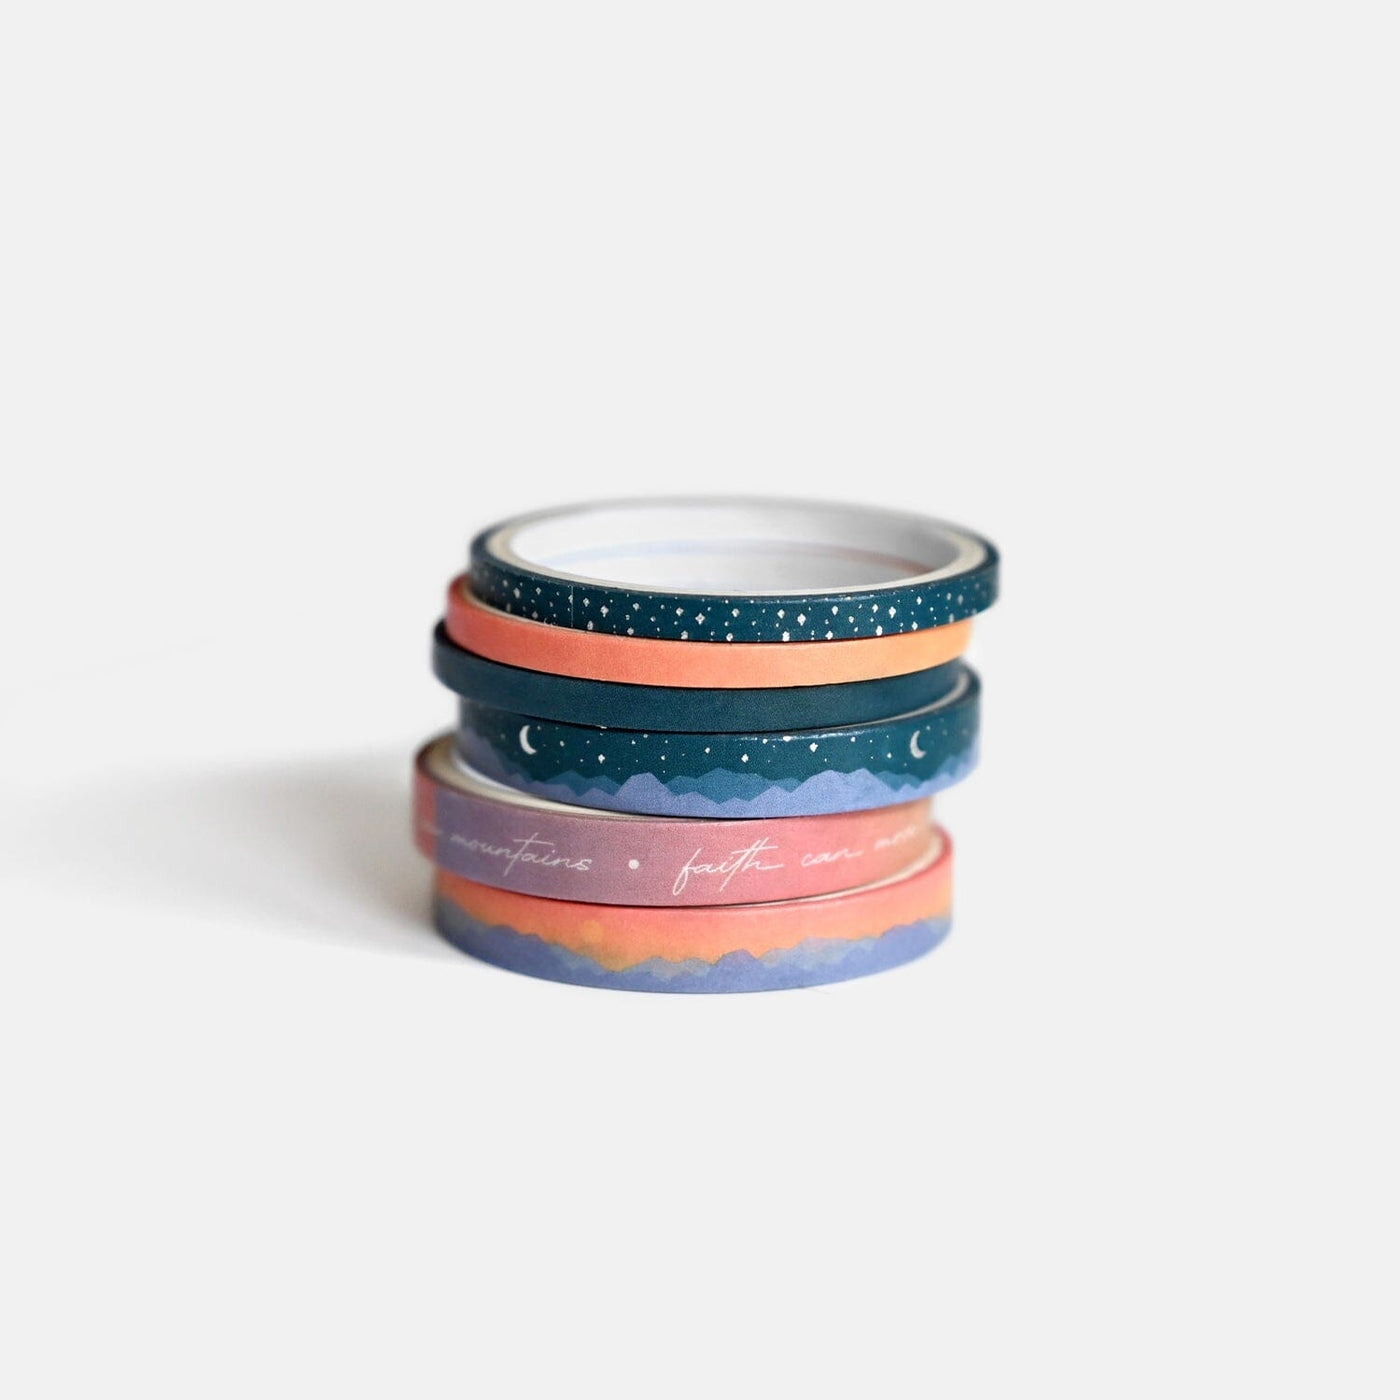 Washi Tape - Quiet Waters - Christian Planner